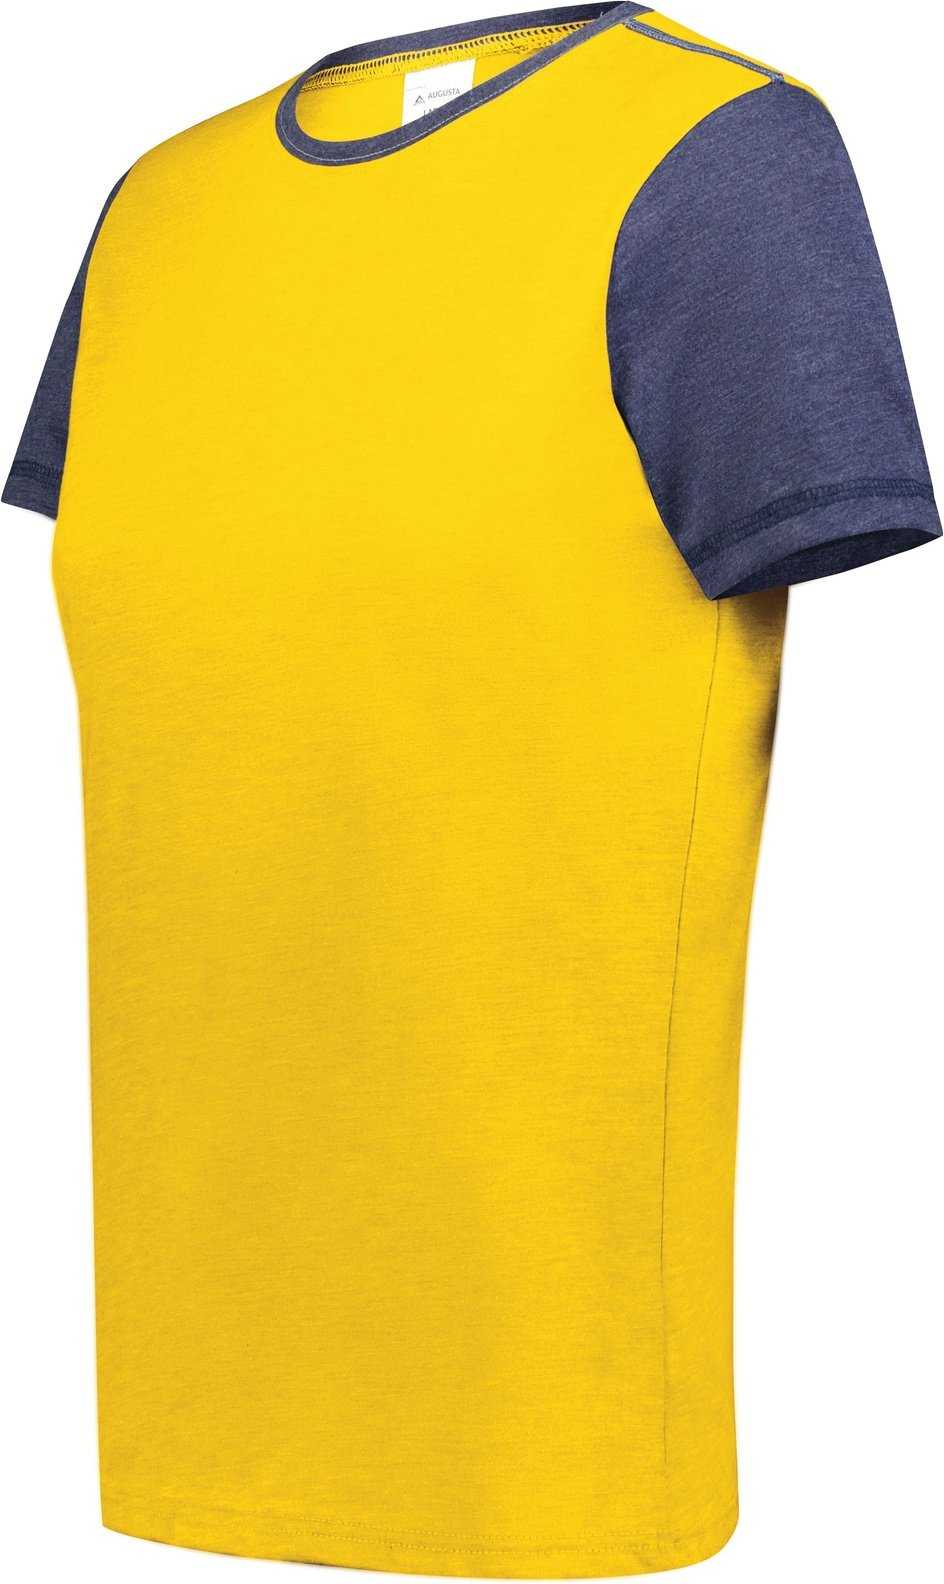 Augusta 6878 Ladies Gameday Vintage Ringer Tee - Gold Heather Navy Heather - HIT a Double